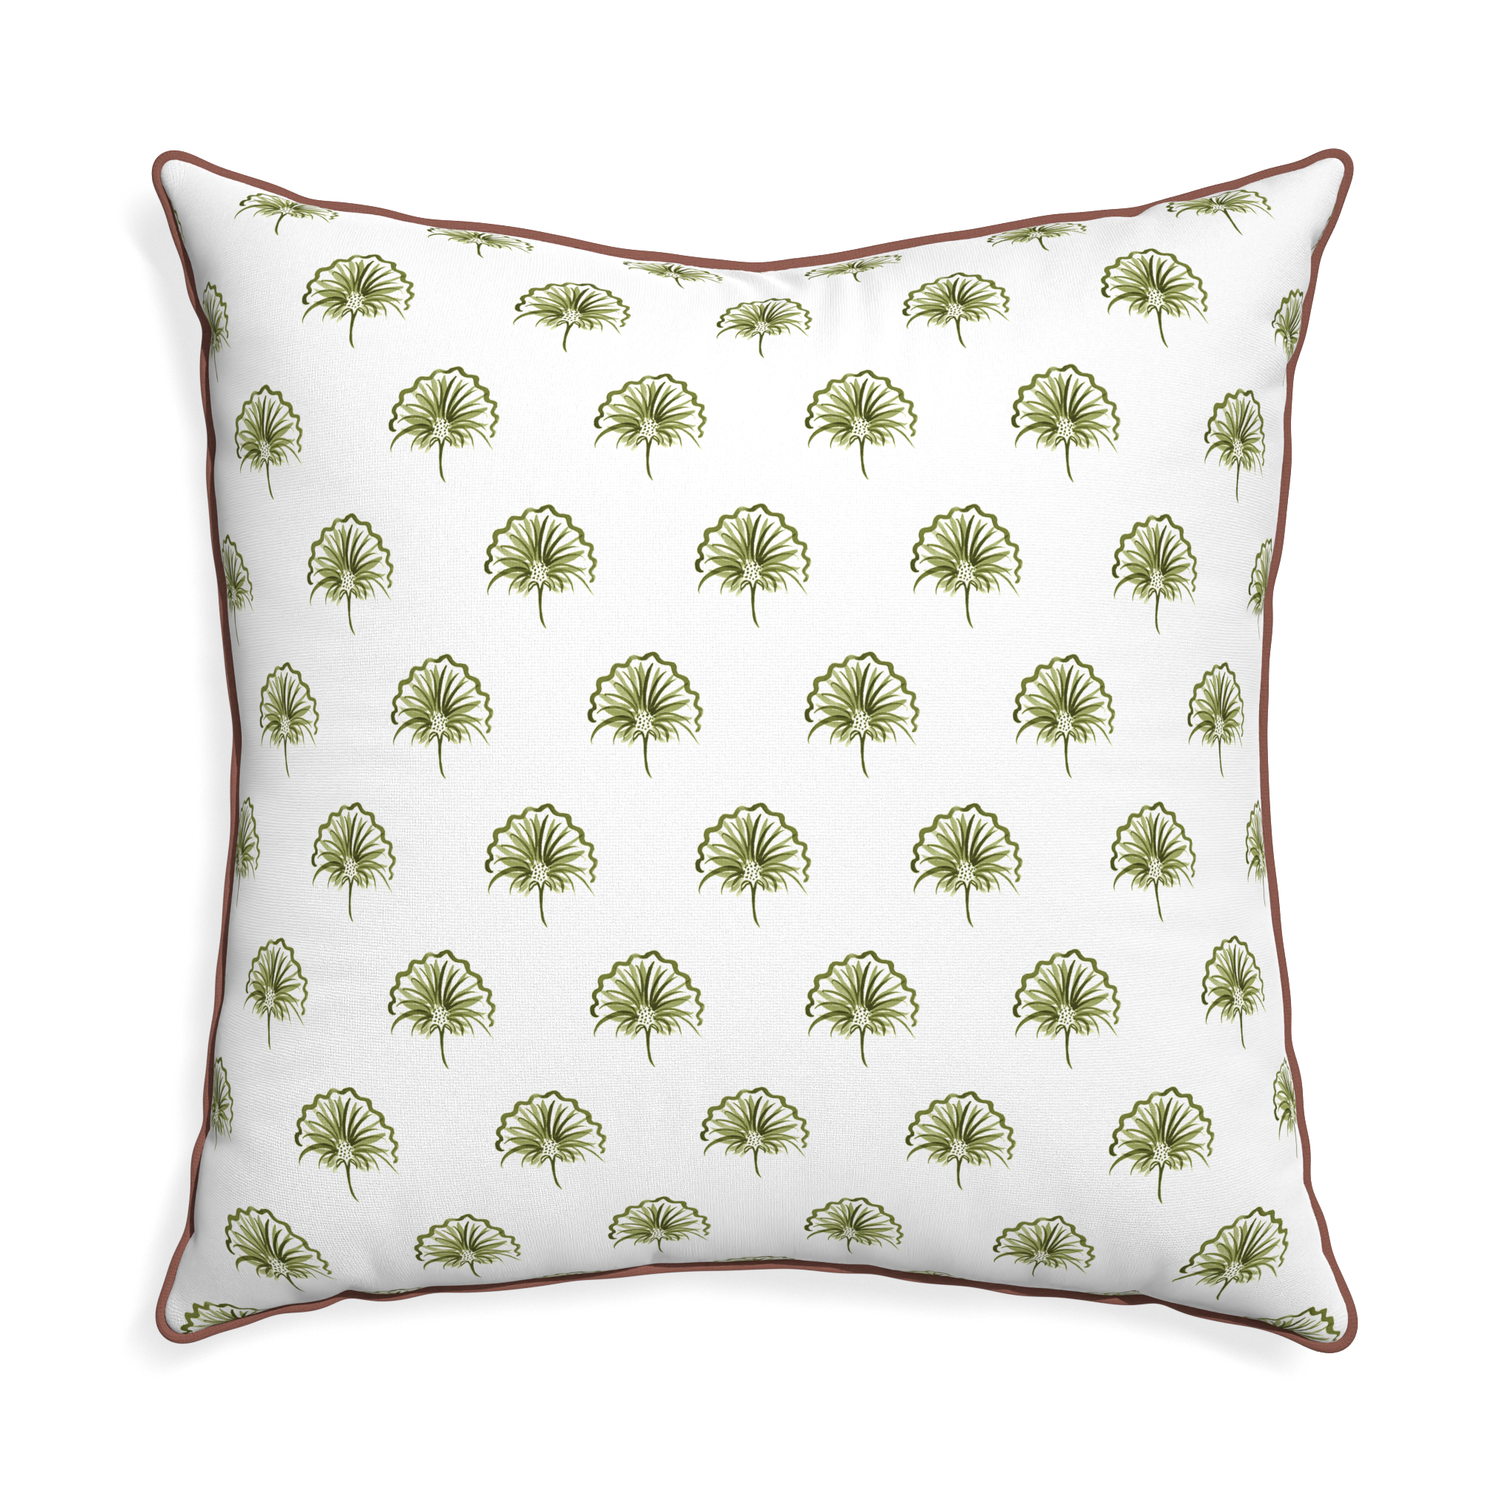 Euro-sham penelope moss custom green floralpillow with w piping on white background